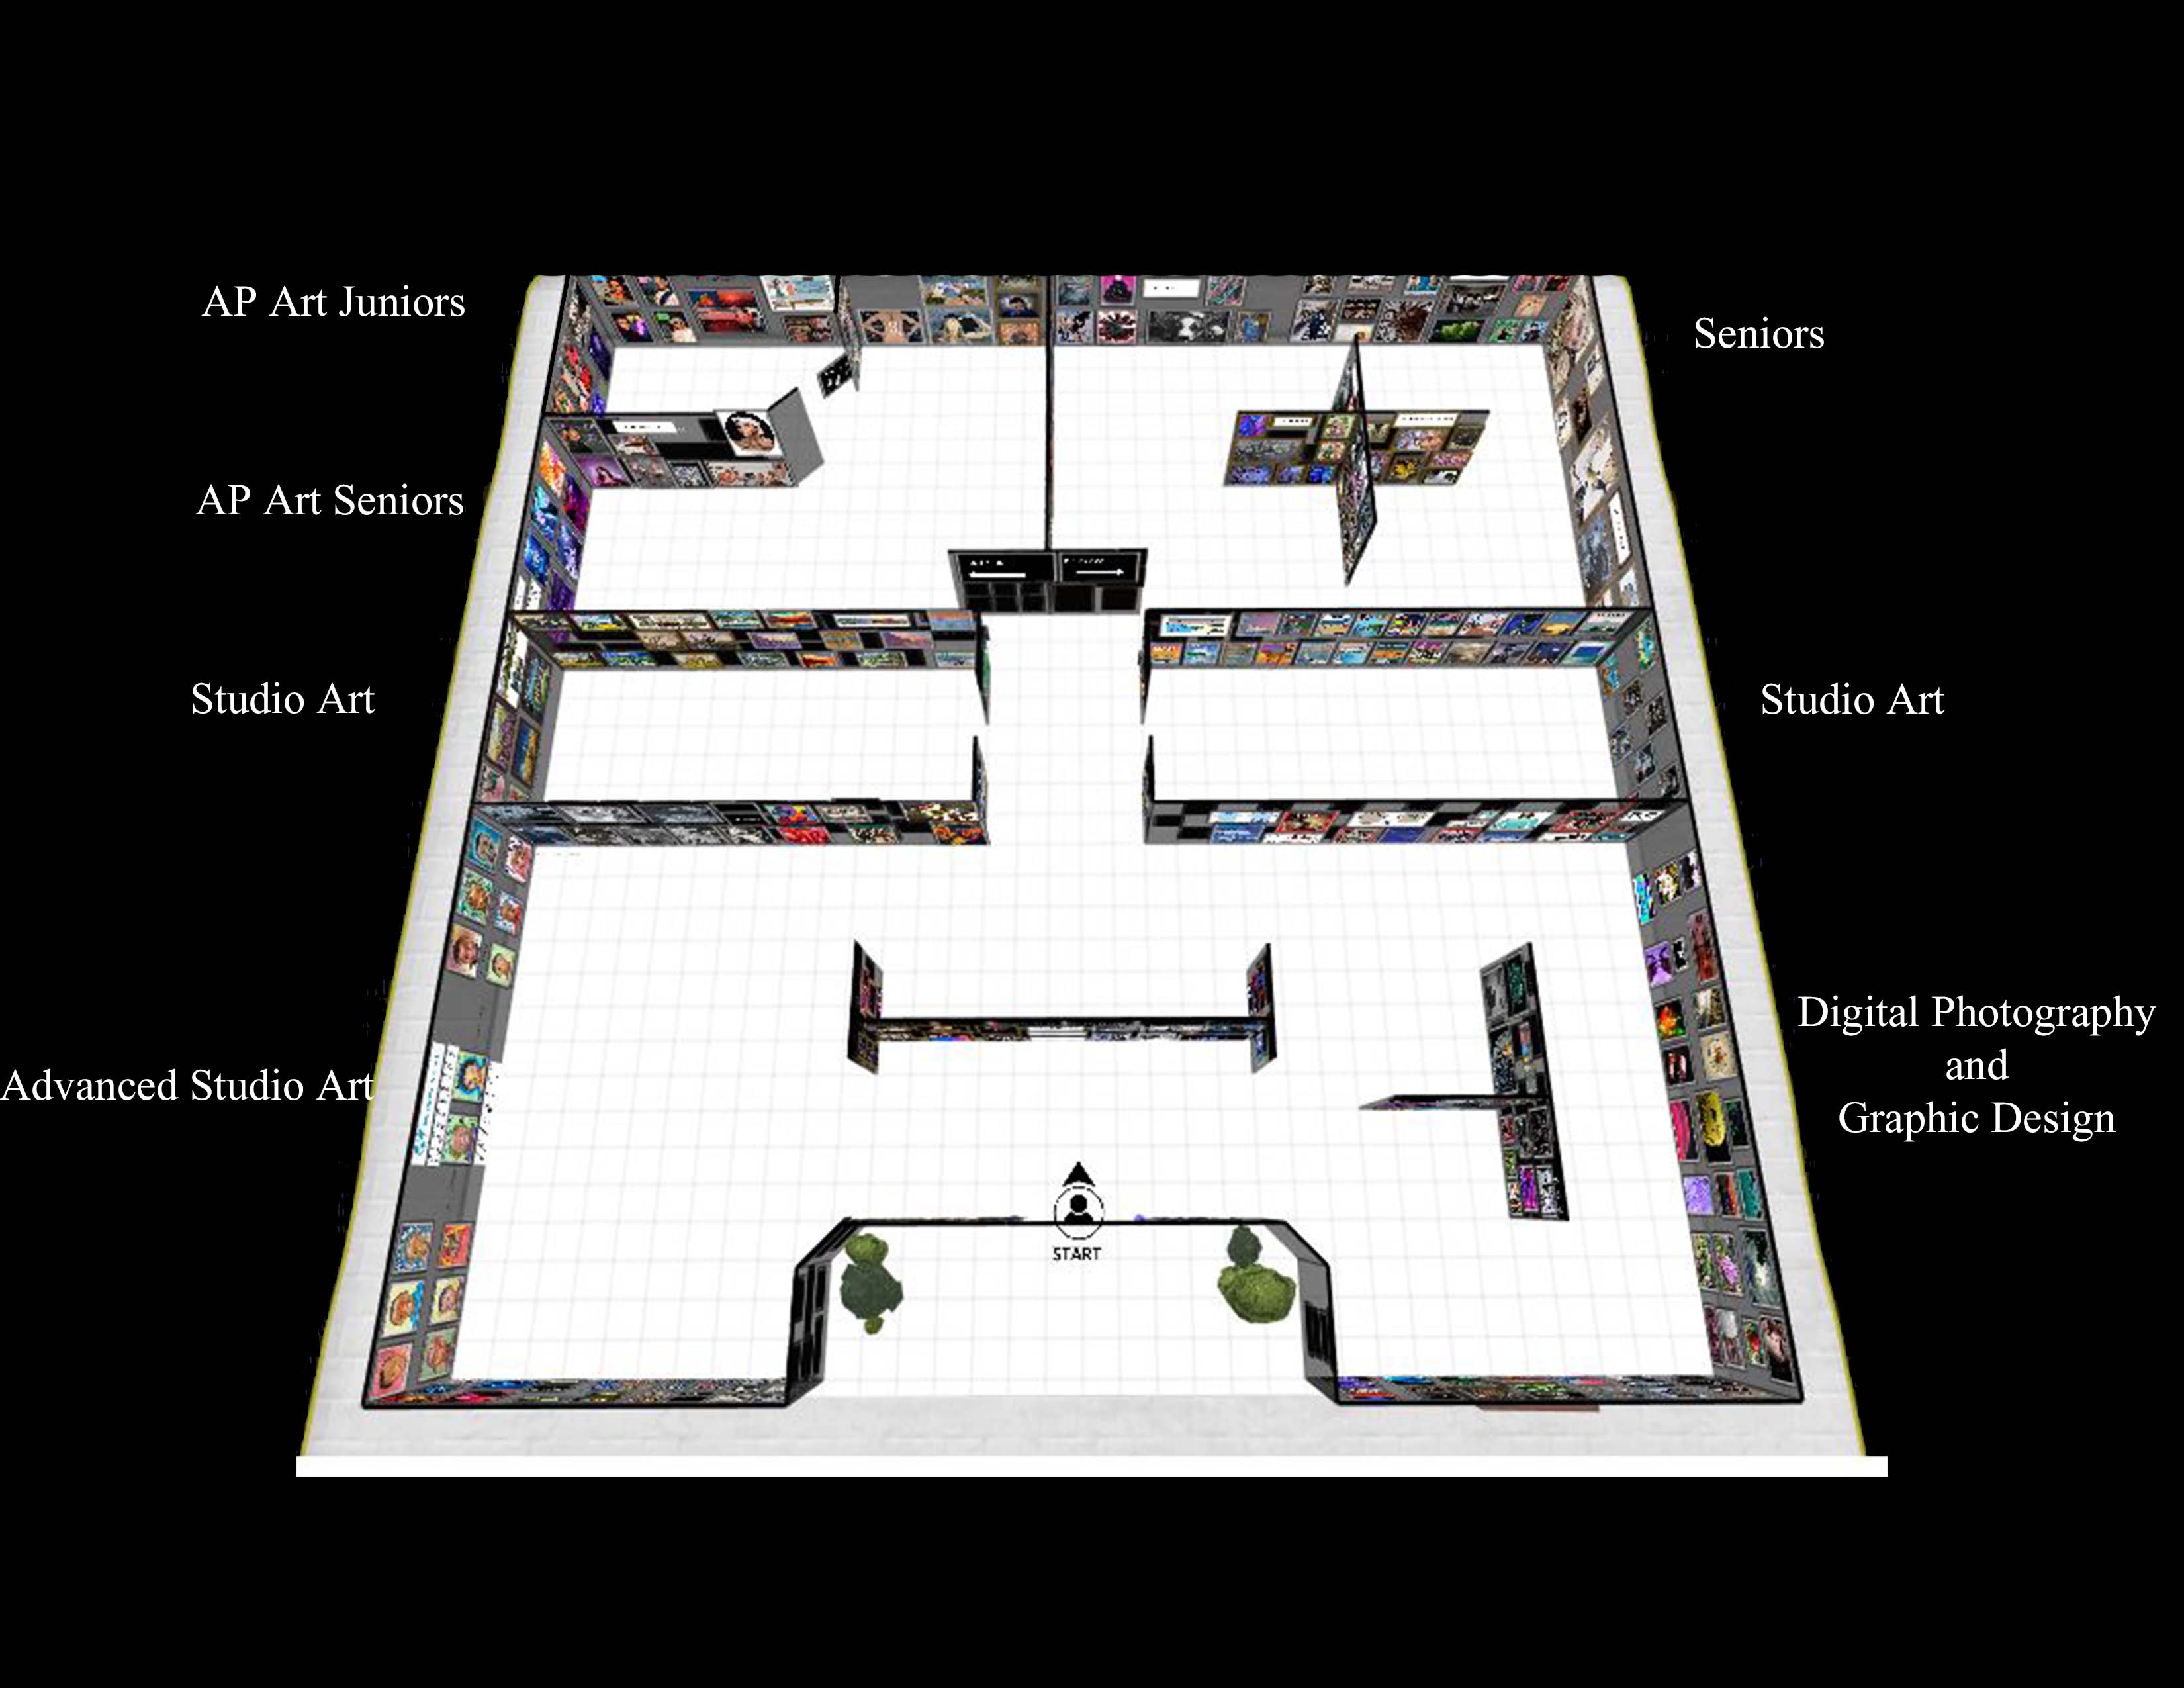 Map showing the layout of the virtual art show